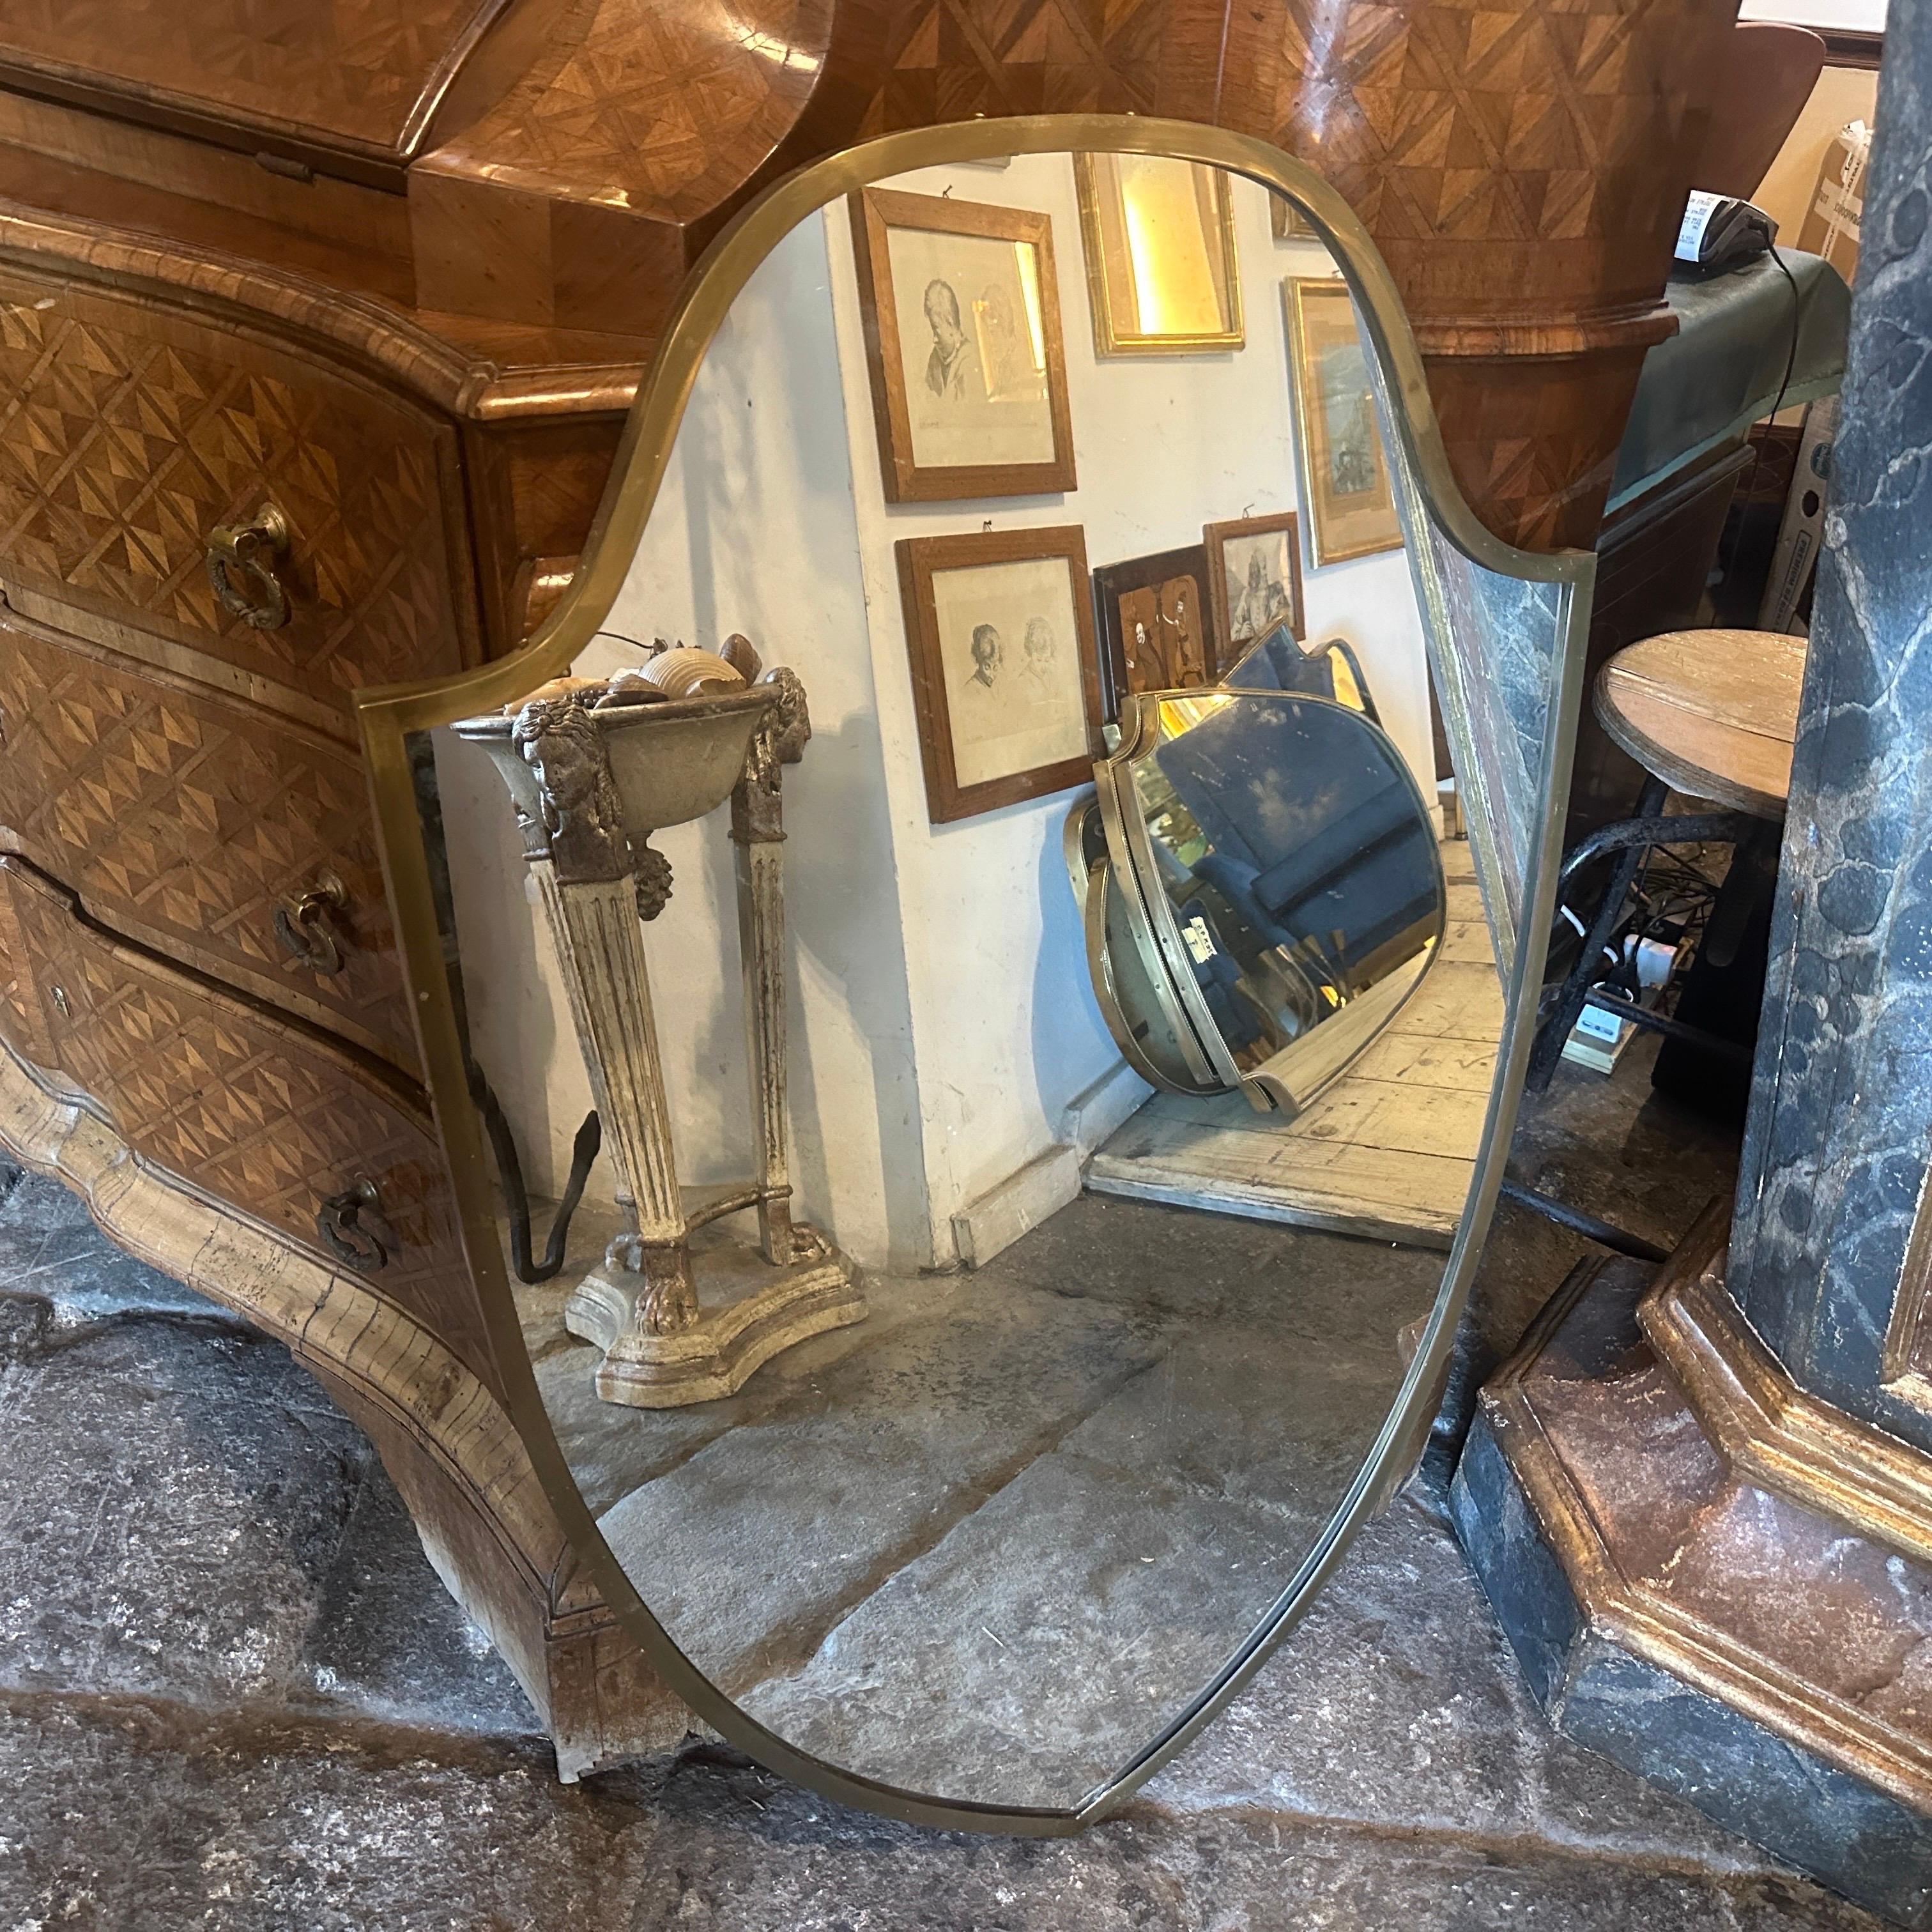 A shield shaped wall mirror designed and manufactured in Italy in the Fifties in the manner of Gio Ponti who used these mirrors to furnish the most beautiful Italian homes of the 1950s. The mirror takes the shape of a shield, an uncommon and